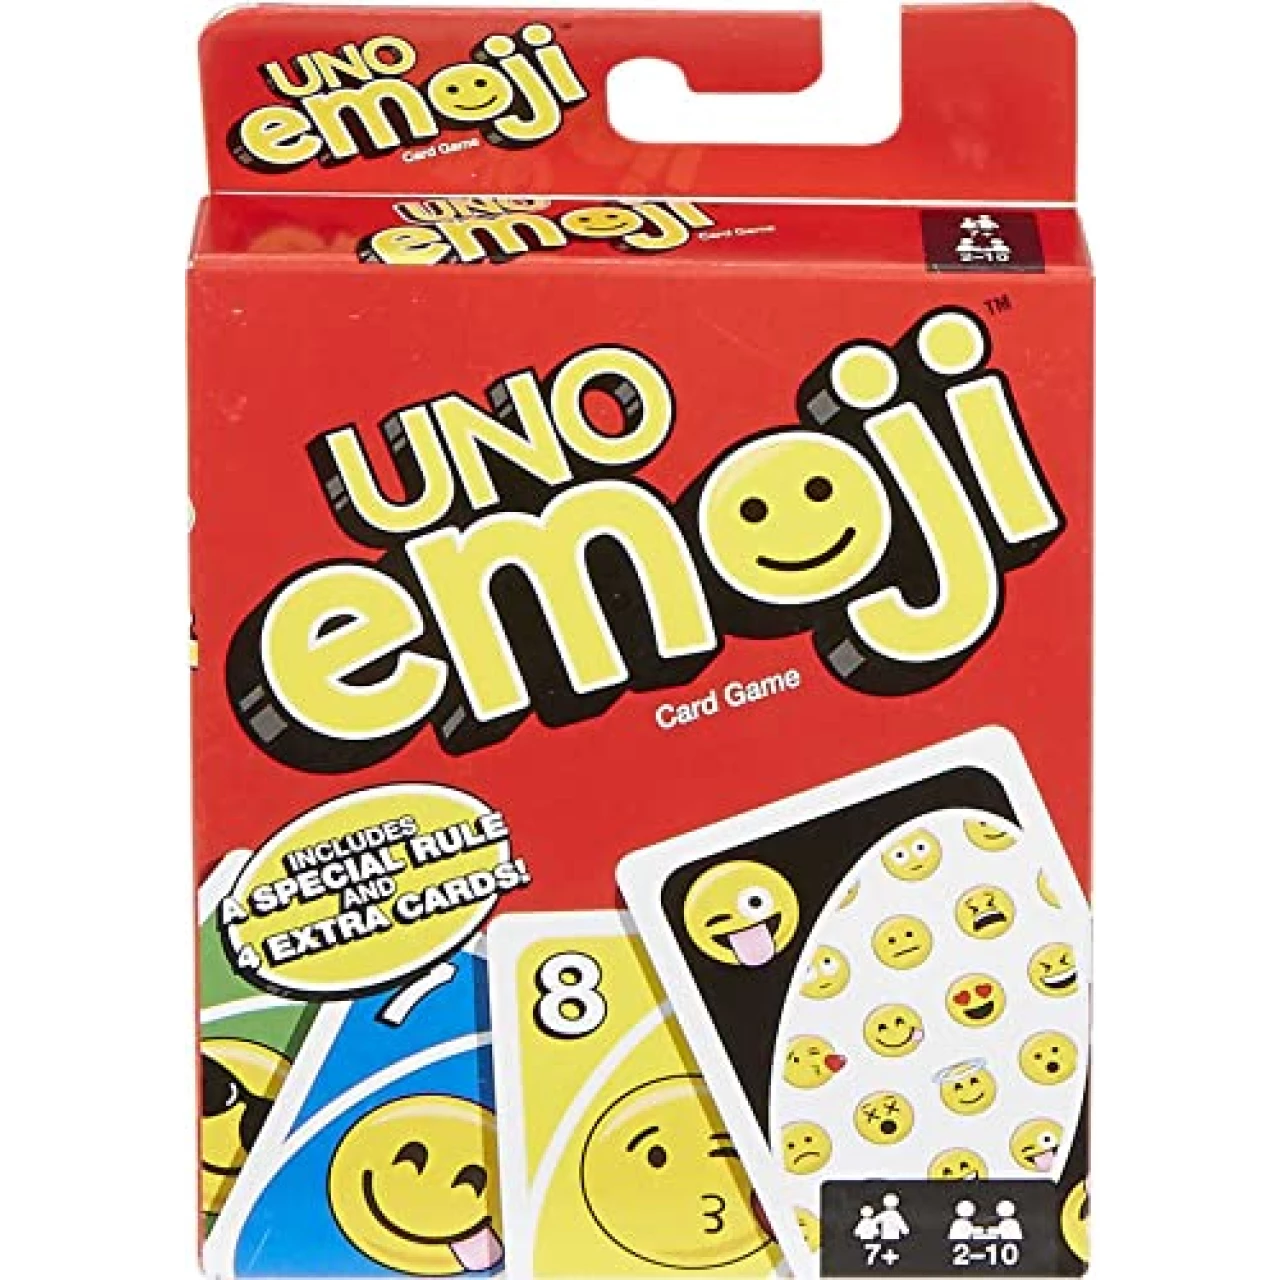 Mattel Games UNO Emojis Multicolor Basic Pack for 7 years and up